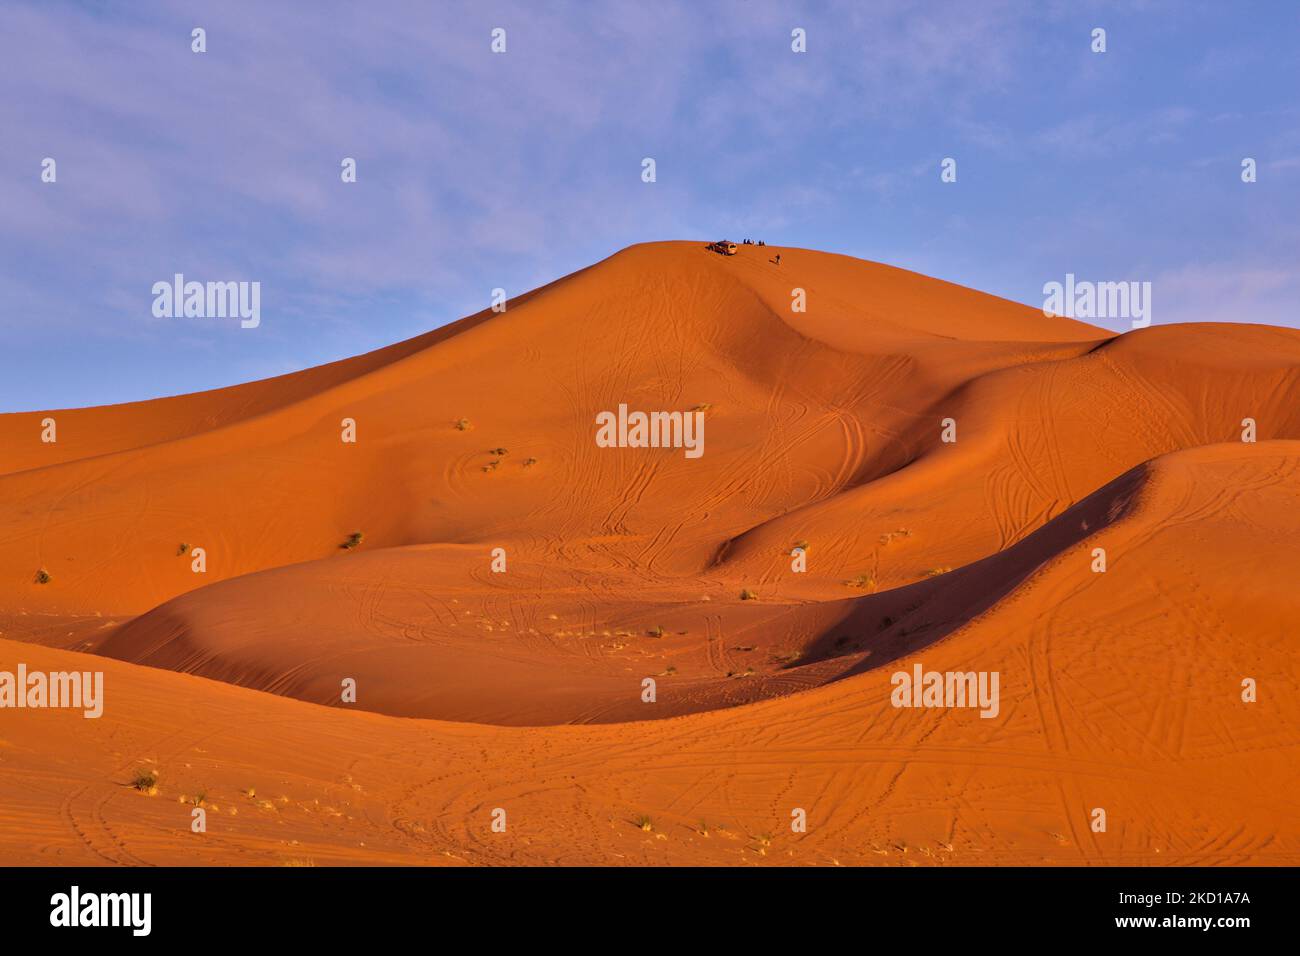 Sand dunes near the small village of Merzouga in Morocco, Africa. Merzouga is a village in the Sahara Desert in Morocco, on the edge of Erg Chebbi, a 50km long and 5km wide set of sand dunes that reach up to 350m. (Photo by Creative Touch Imaging Ltd./NurPhoto) Stock Photo